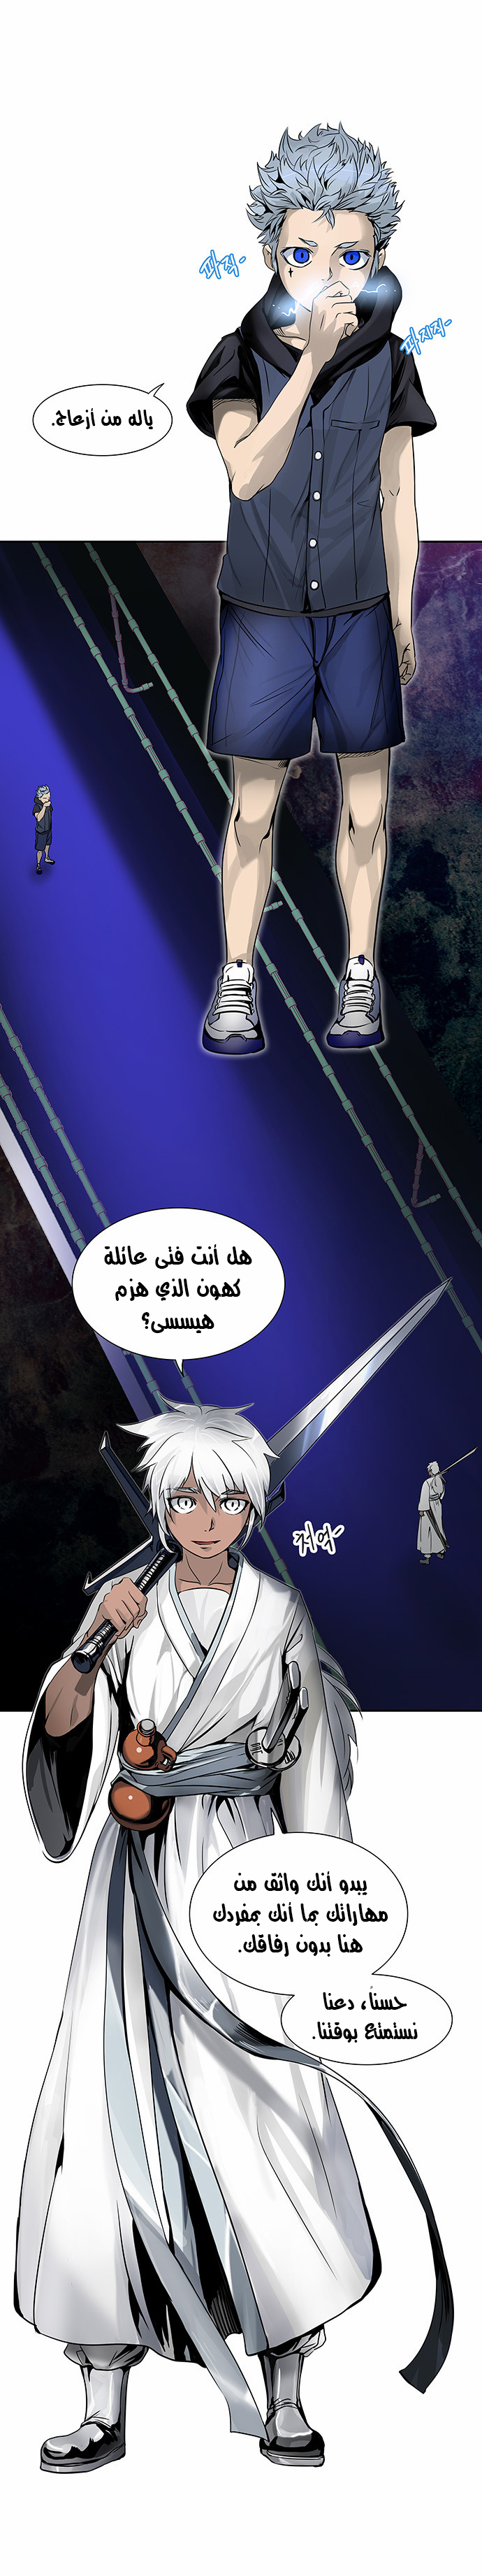 Tower of God 2: Chapter 211 - Page 1